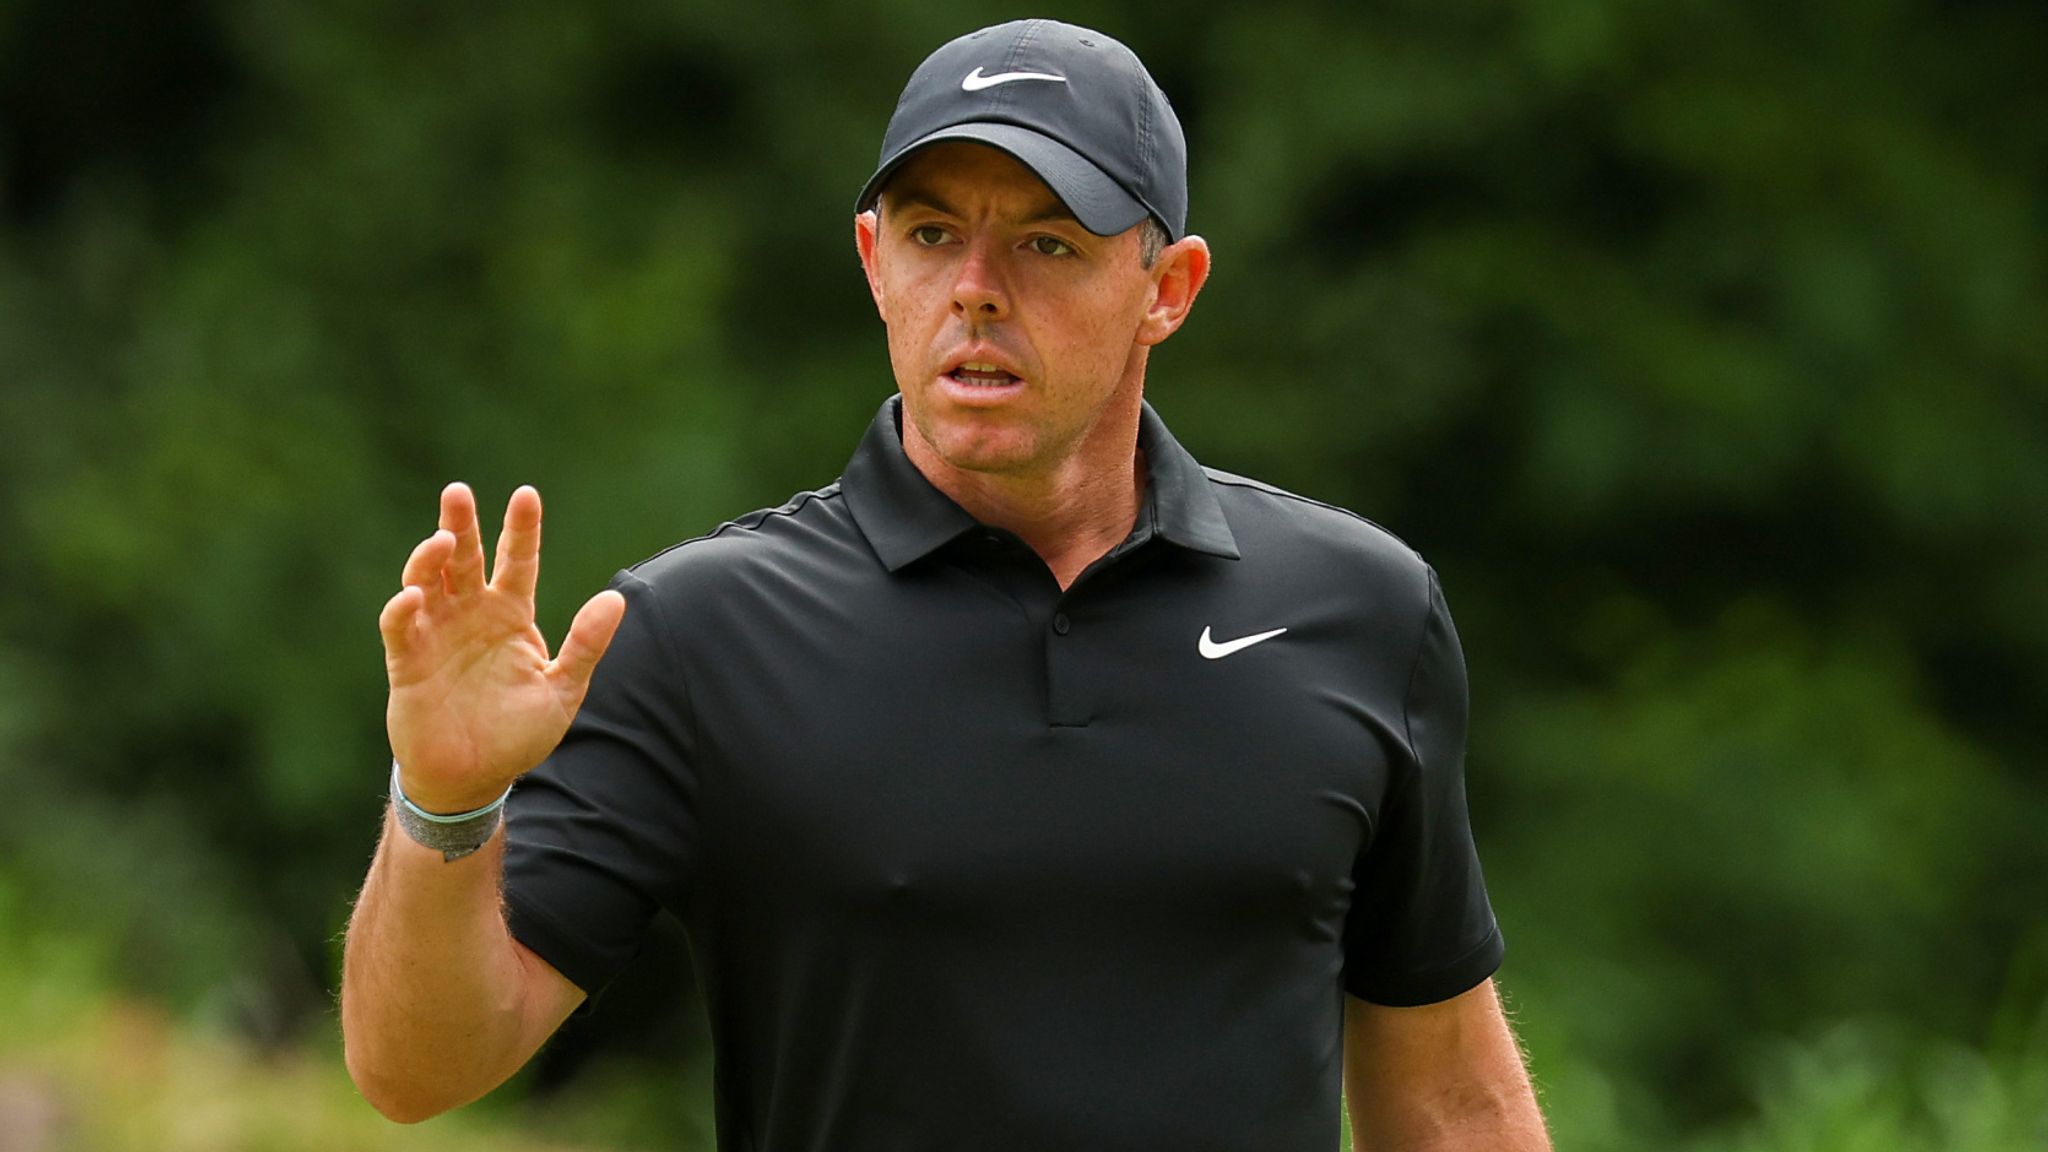 Rory McIlroy moves into contention at Travelers Championship after second-round 64; Keegan Bradley and Denny McCarthy lead Golf News Sky Sports